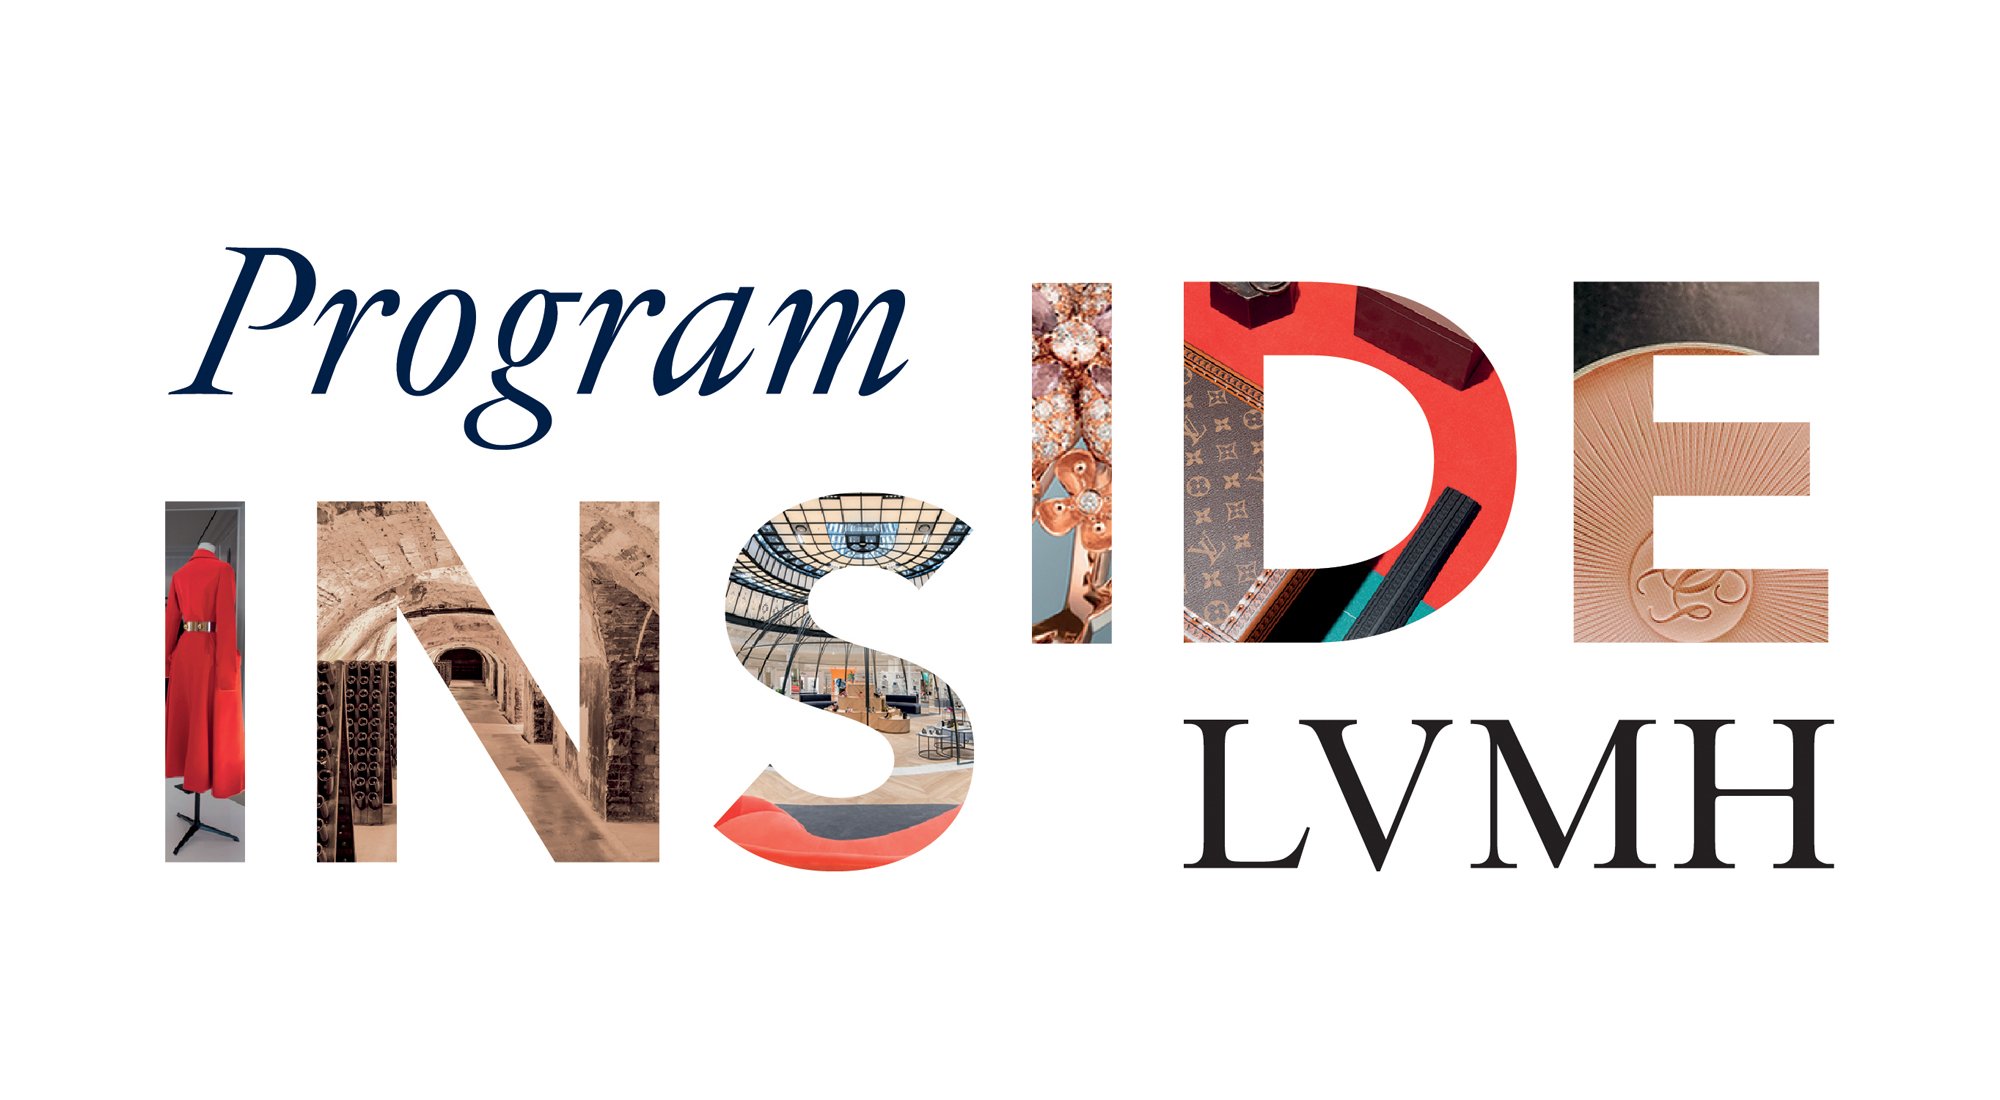 LVMH on X: Each year LVMH and its Maisons welcome 7,500 interns and recent  graduates around the world. LVMH has launched the #INSIDELVMH Program to  let top candidates from 50 partner universities